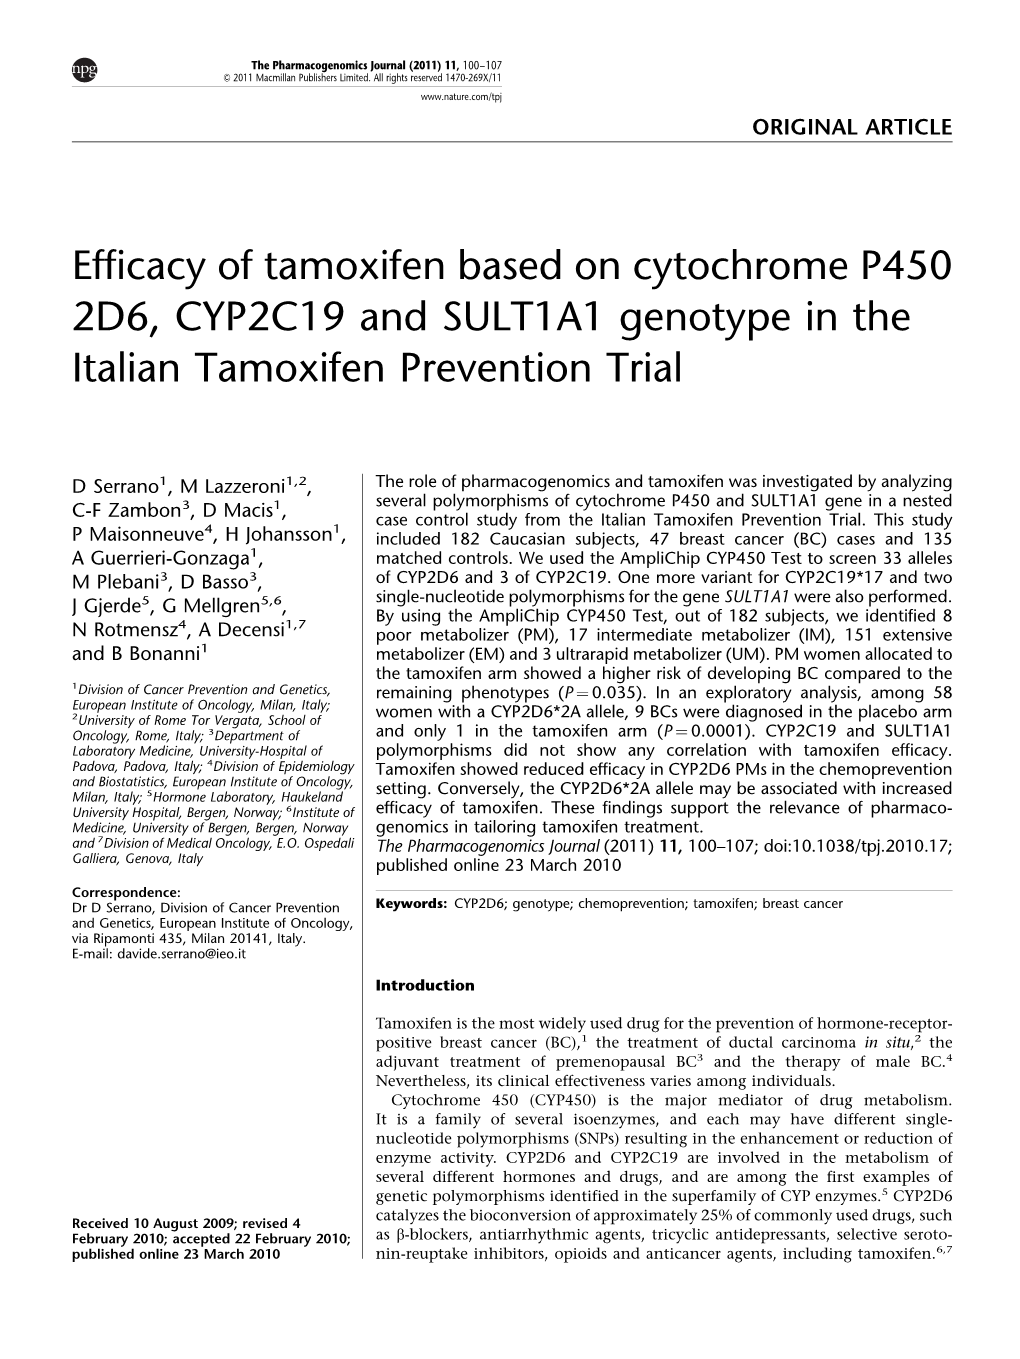 Efficacy of Tamoxifen Based on Cytochrome P450 2D6, CYP2C19 and SULT1A1 Genotype in the Italian Tamoxifen Prevention Trial